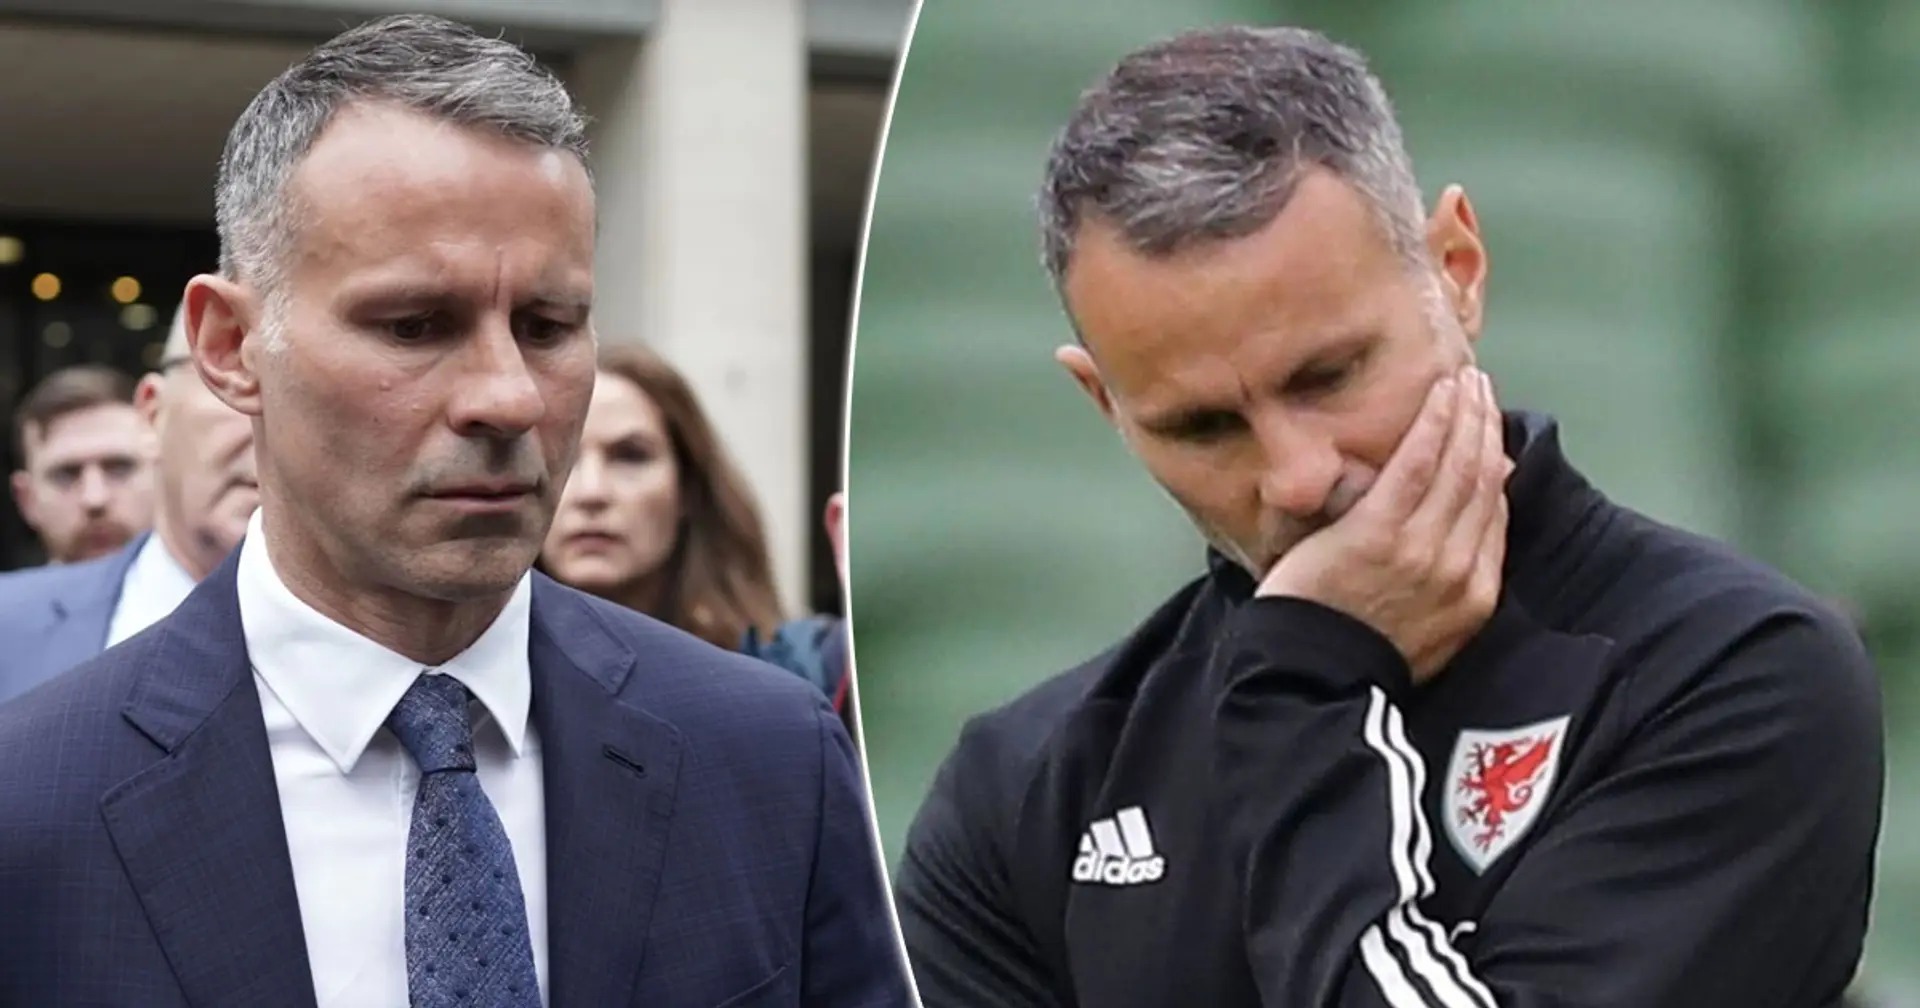 Ryan Giggs steps down as Wales manager amid domestic violence allegations